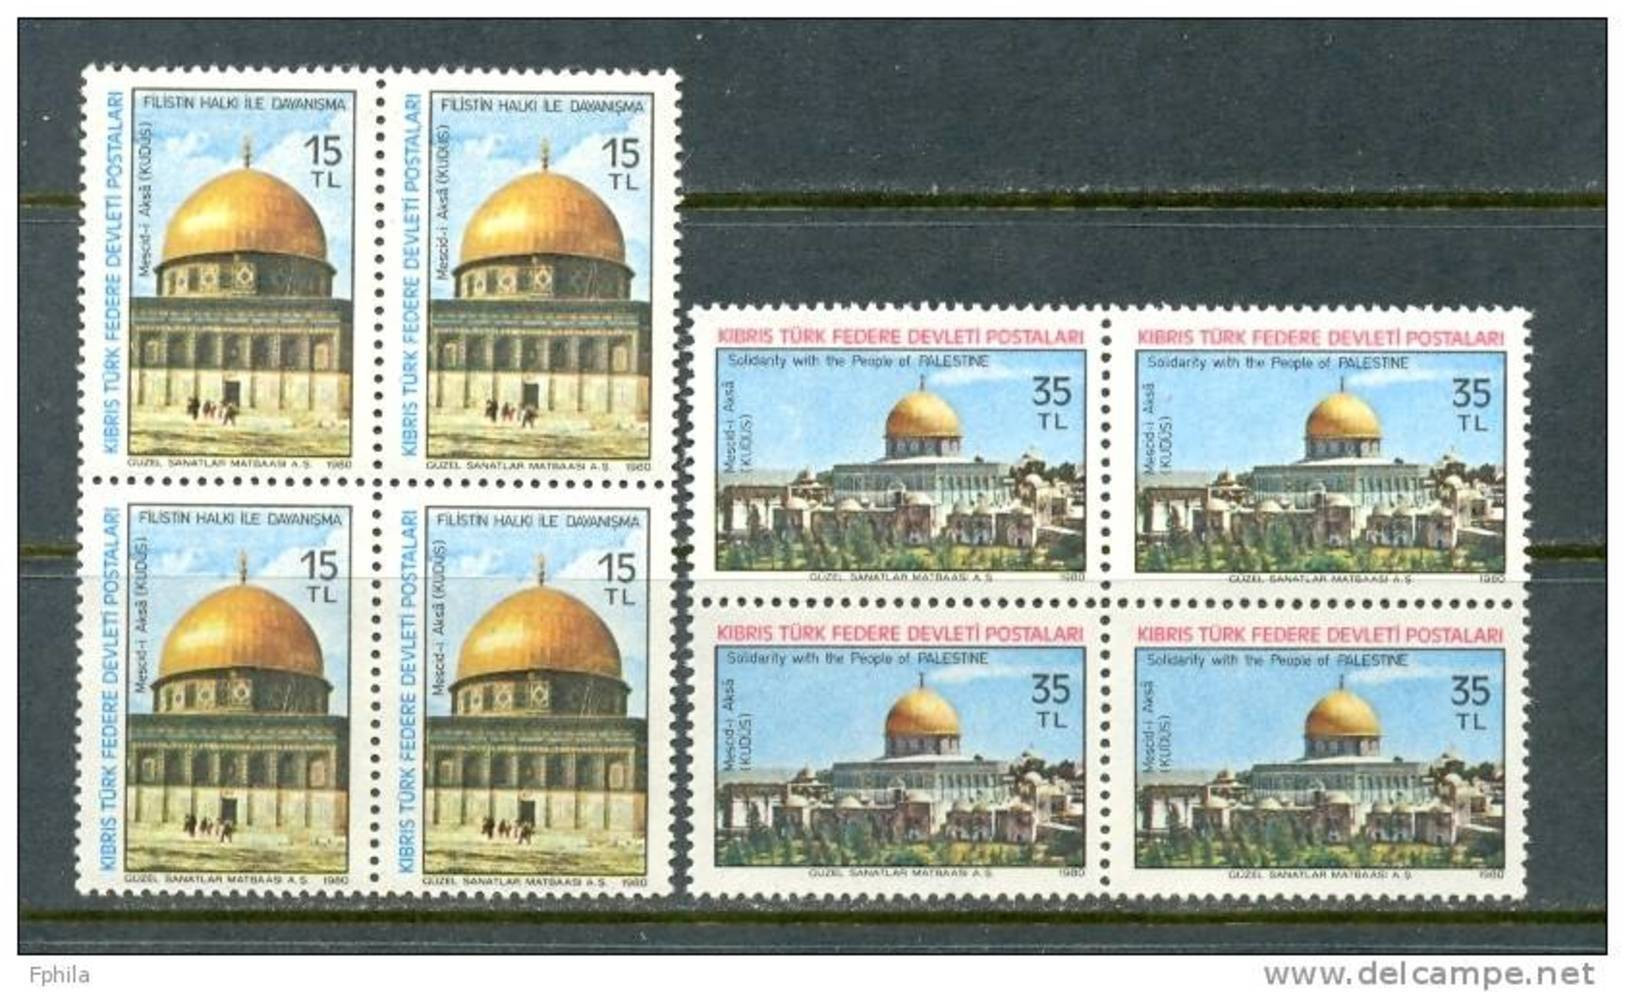 1980 NORTH CYPRUS SOLIDARITY WITH THE PEOPLE OF PALESTINE BLOCK OF 4 MNH ** - Unused Stamps